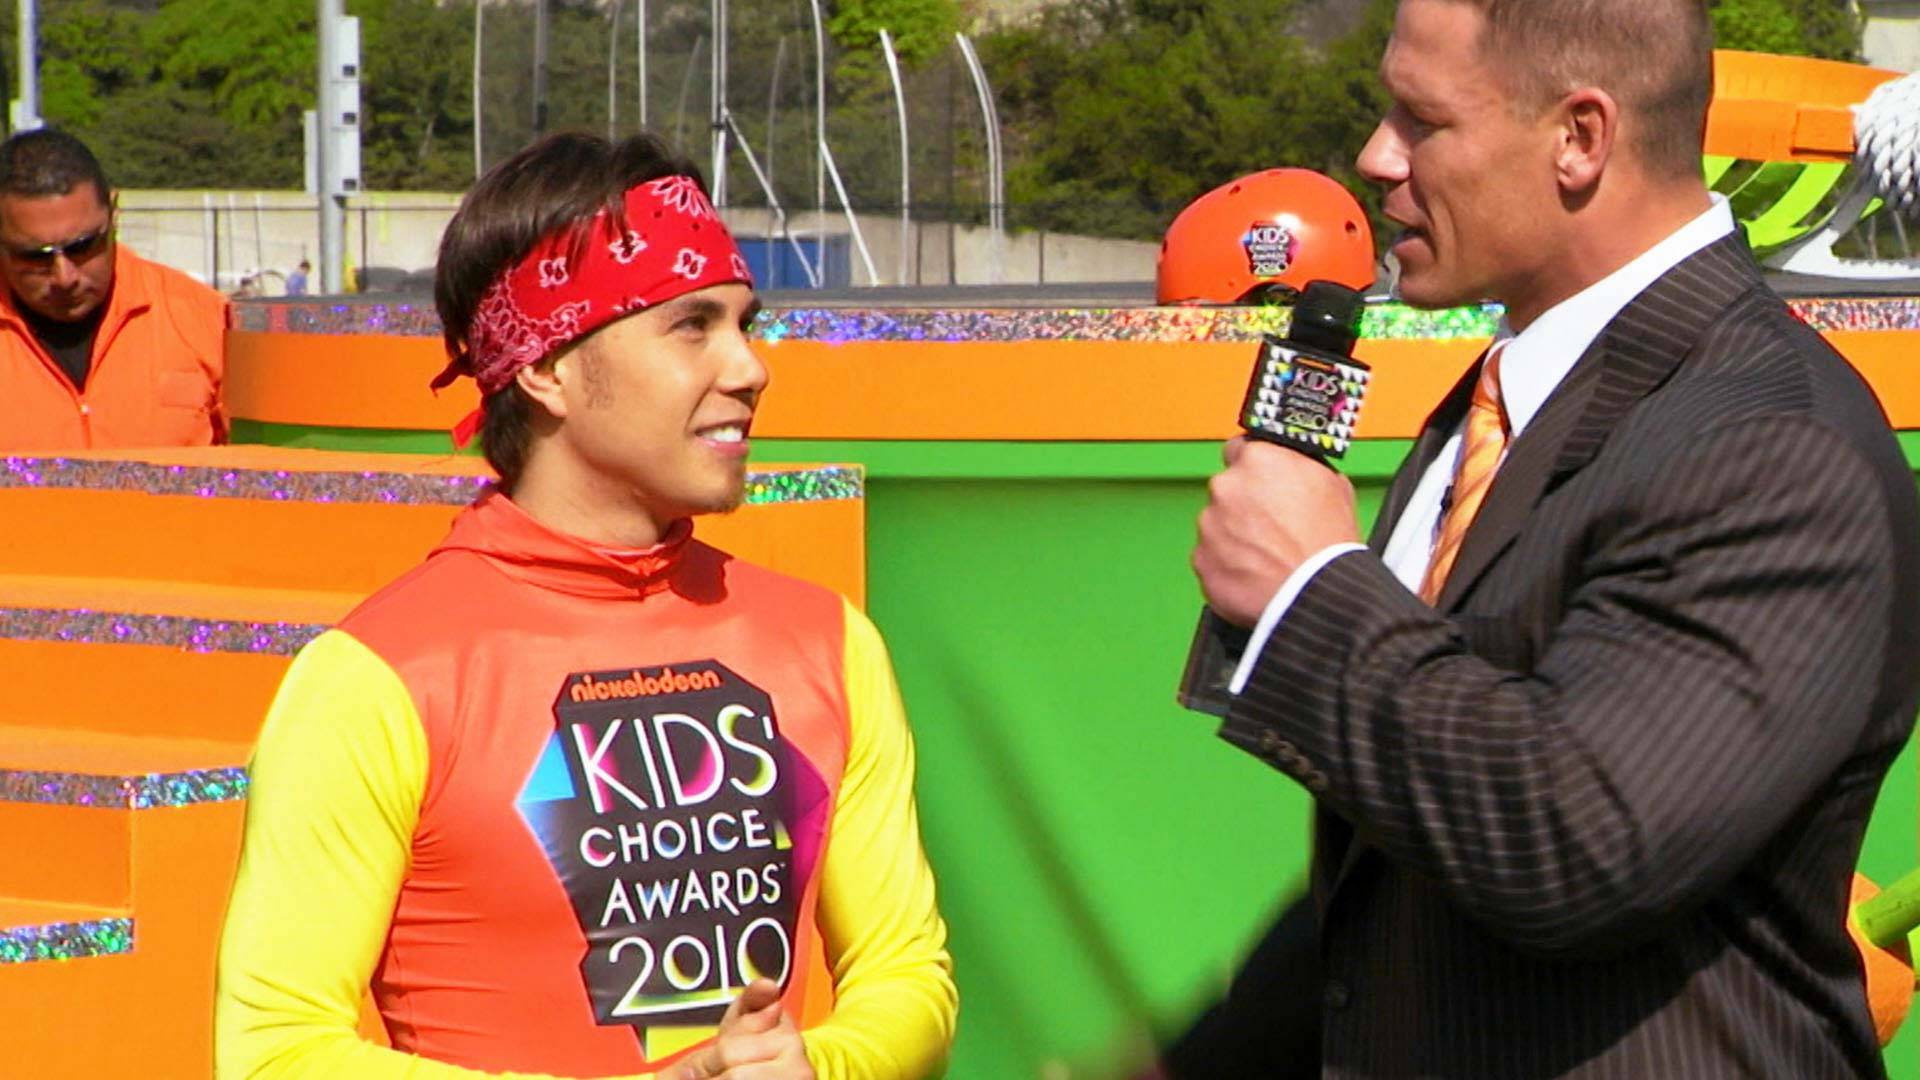 Apollo Ohno is interviewed in front of slime